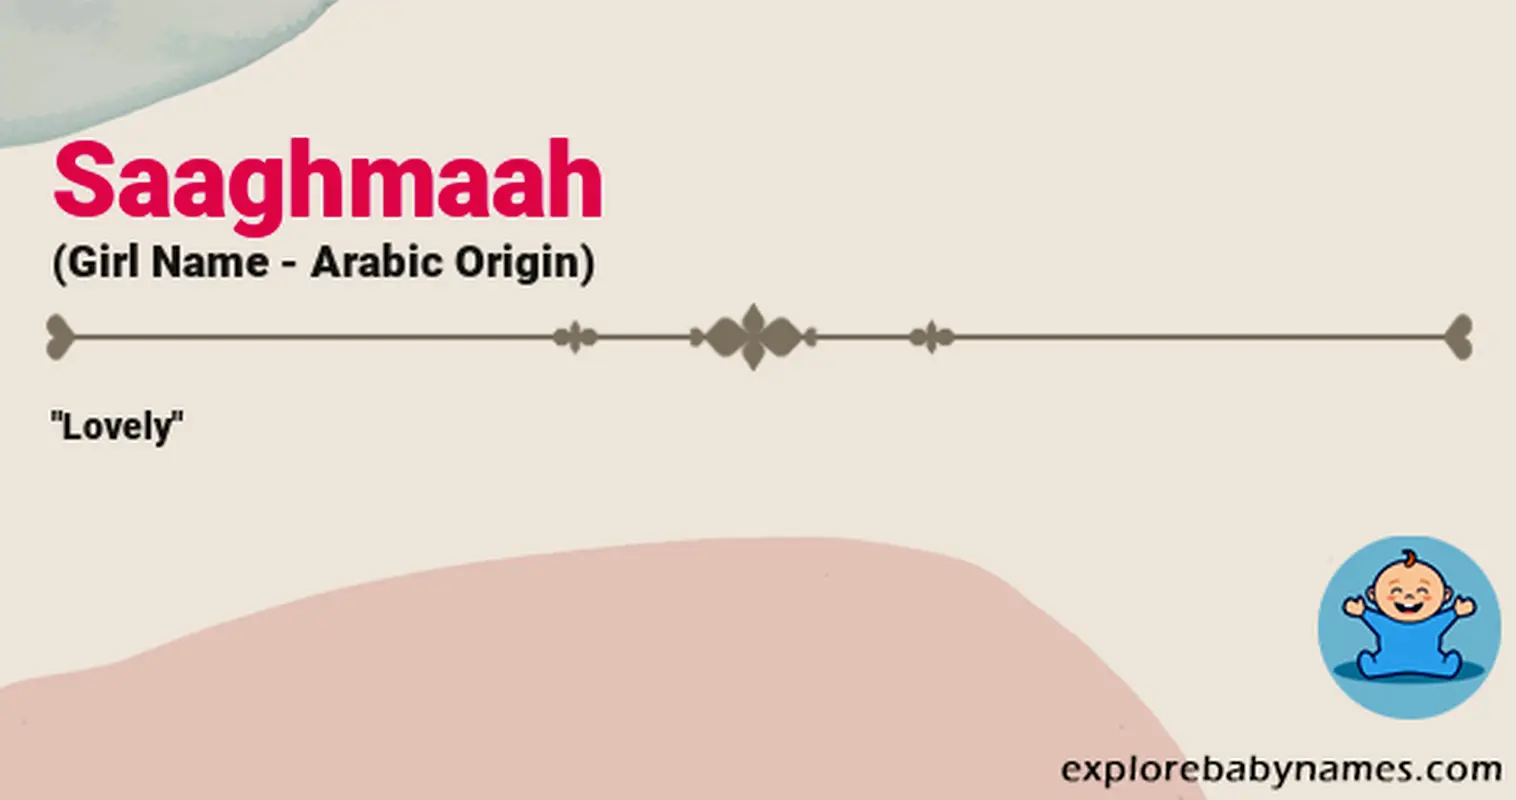 Meaning of Saaghmaah